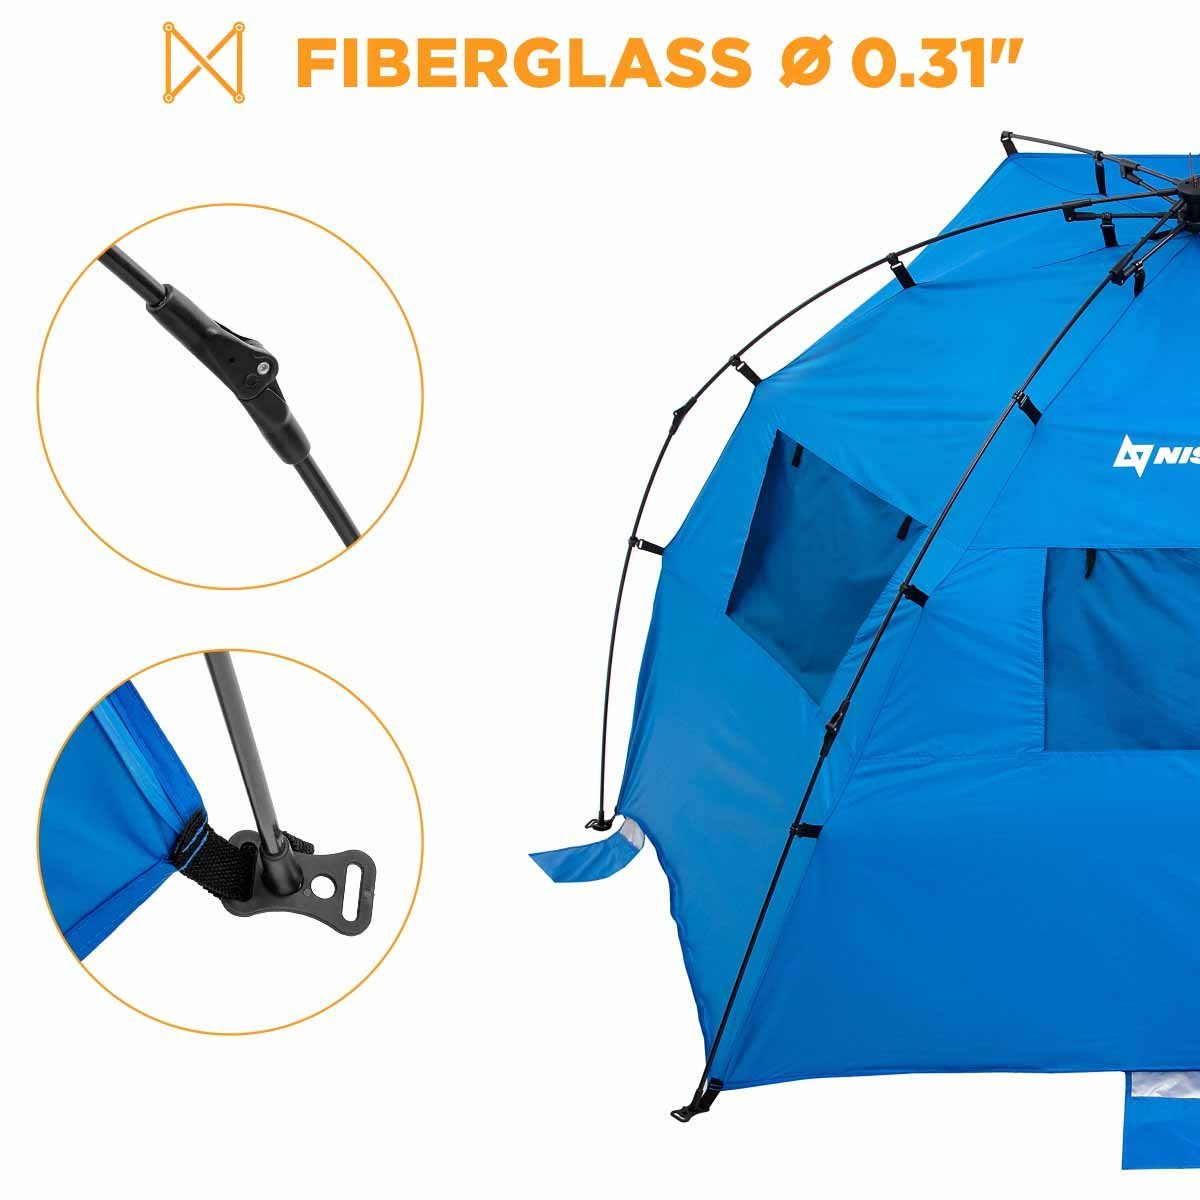 4 Person Large Easy Up Beach Tent Sun Shade Shelter's frame is made of 0.31-inch fiberglass